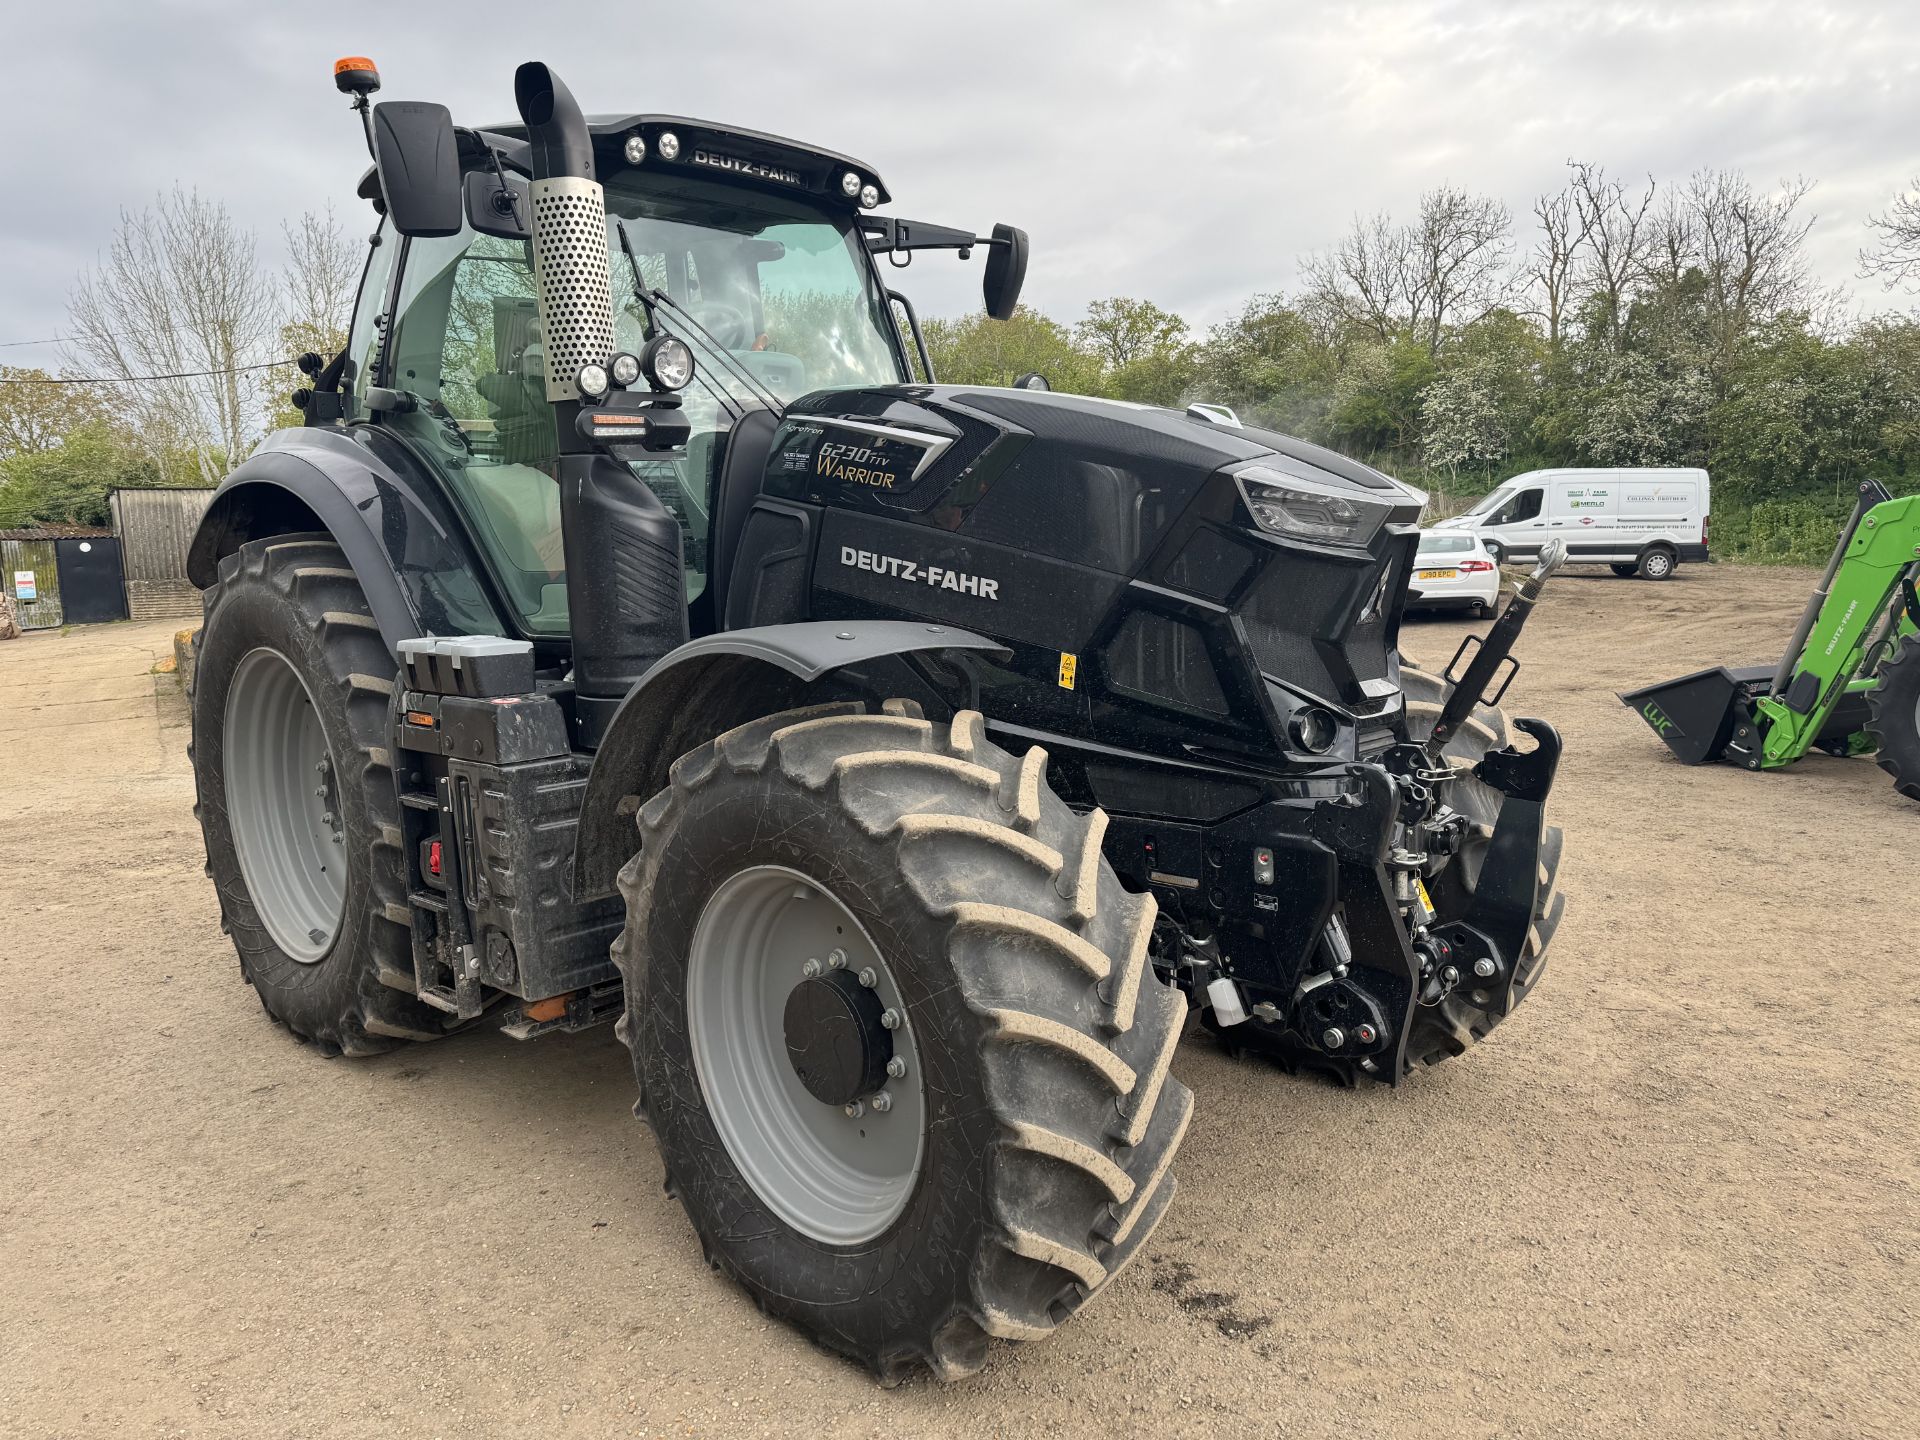 1: Deutz-Fahr Agrotron 6230 TTV Black Warrior, 4 Wheel Drive Tractor with Front Linkage - Image 2 of 14